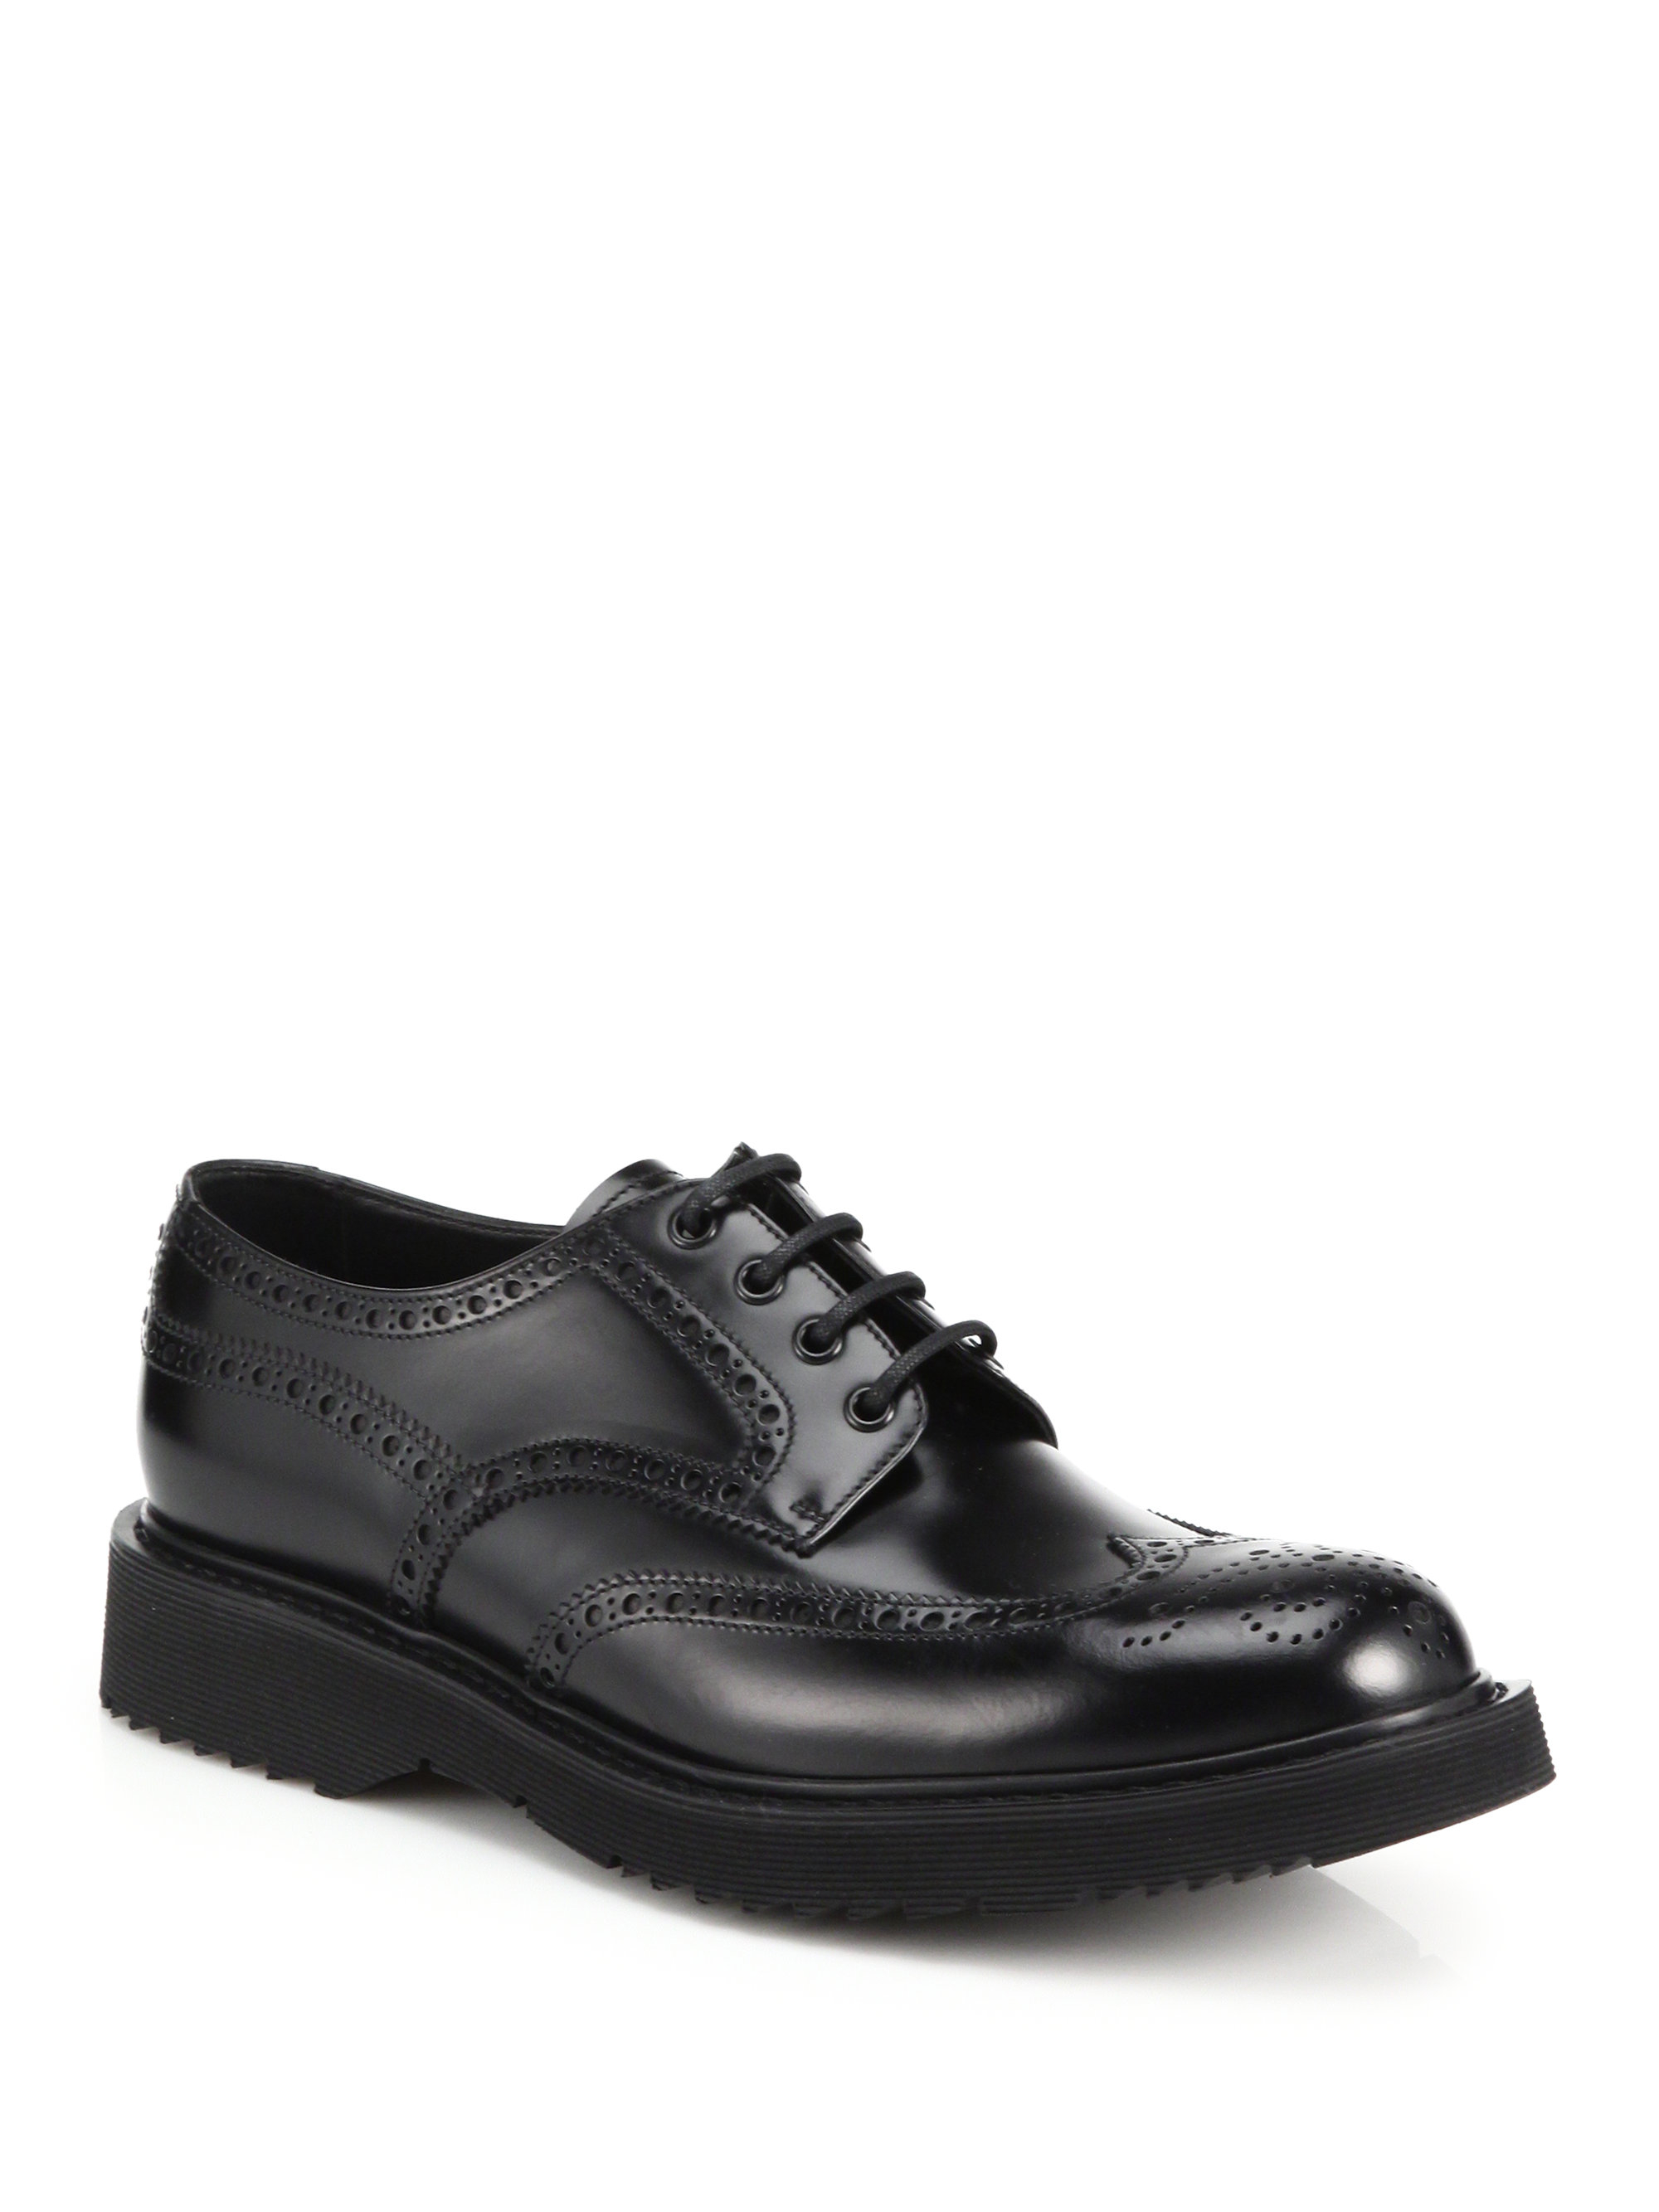 Prada Rois Spazzolato Leather Derby Shoes in Black for Men - Lyst